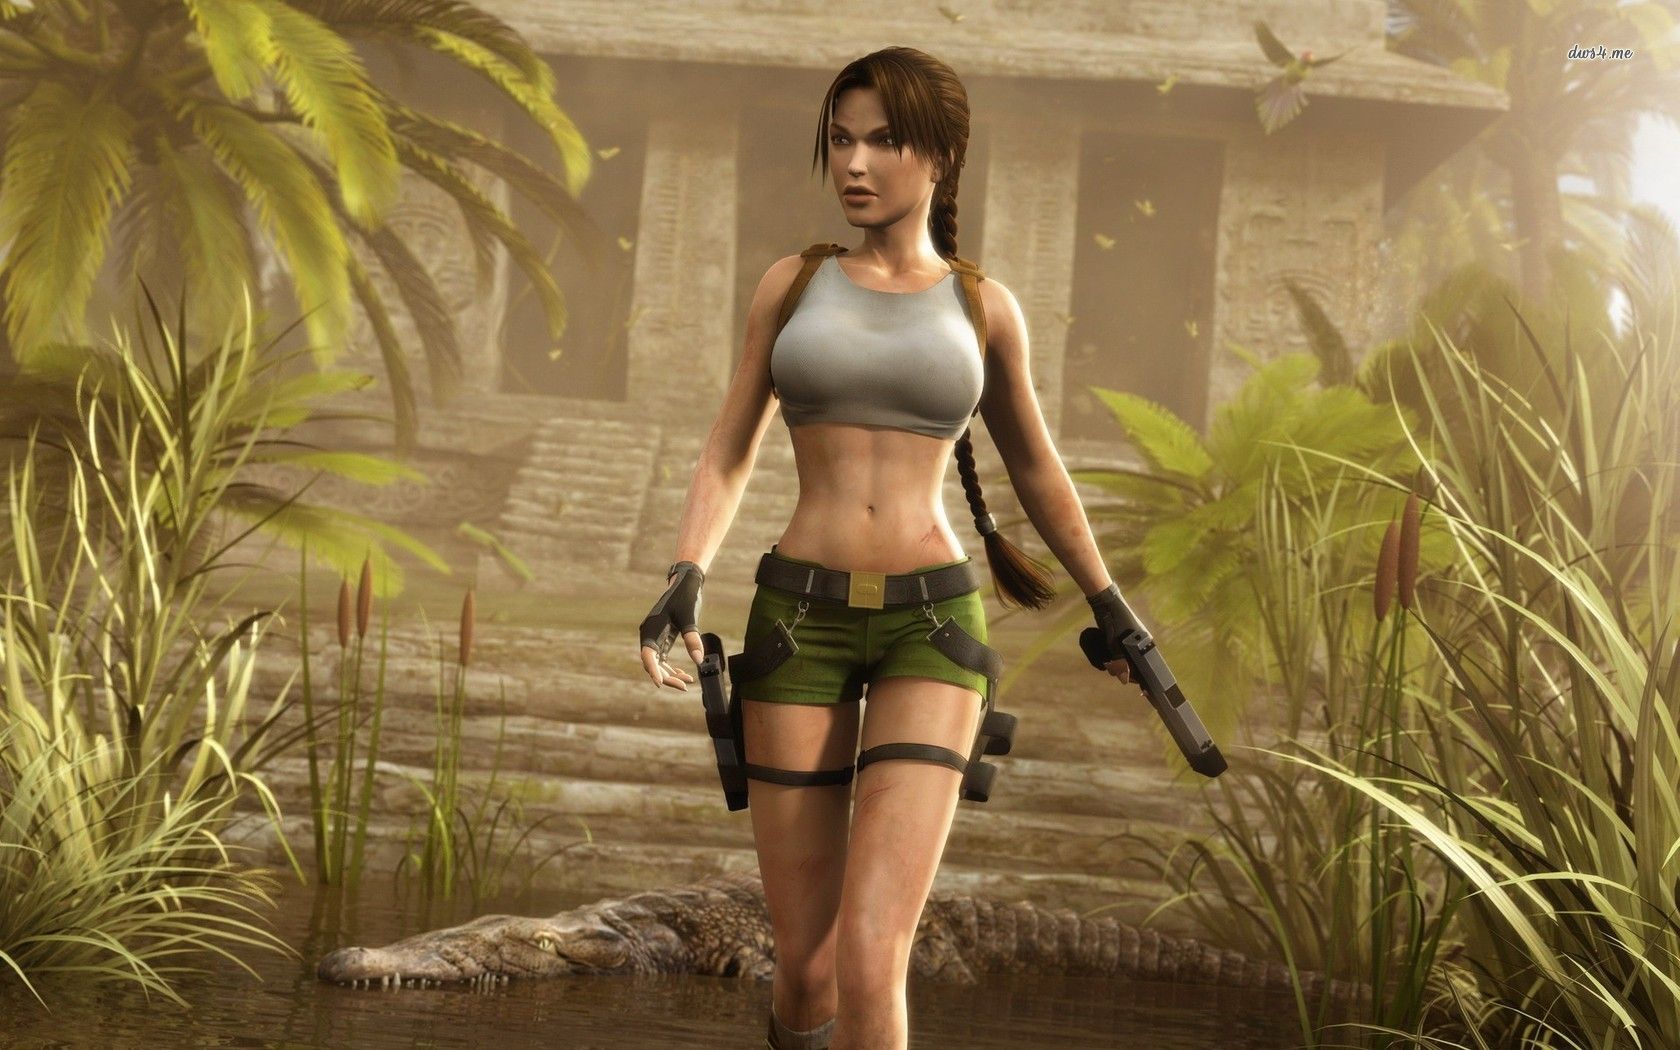 Lara Croft: Tomb Raider is getting a new game on top of her live-action movie reboot